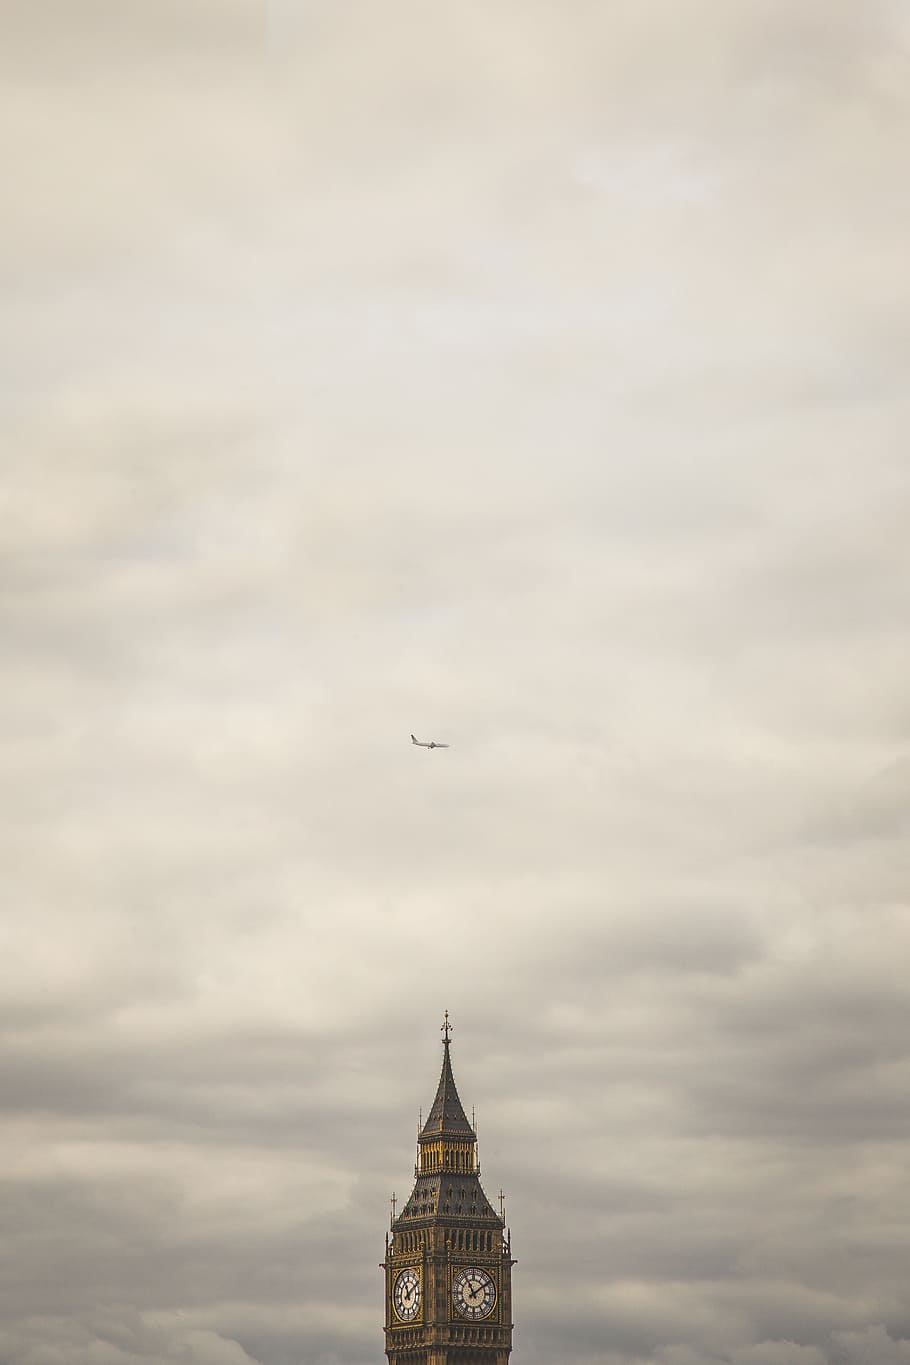 HD wallpaper: Elizabeth Tower under of white airliner during heavy clouds, Elizabeth Tower, London